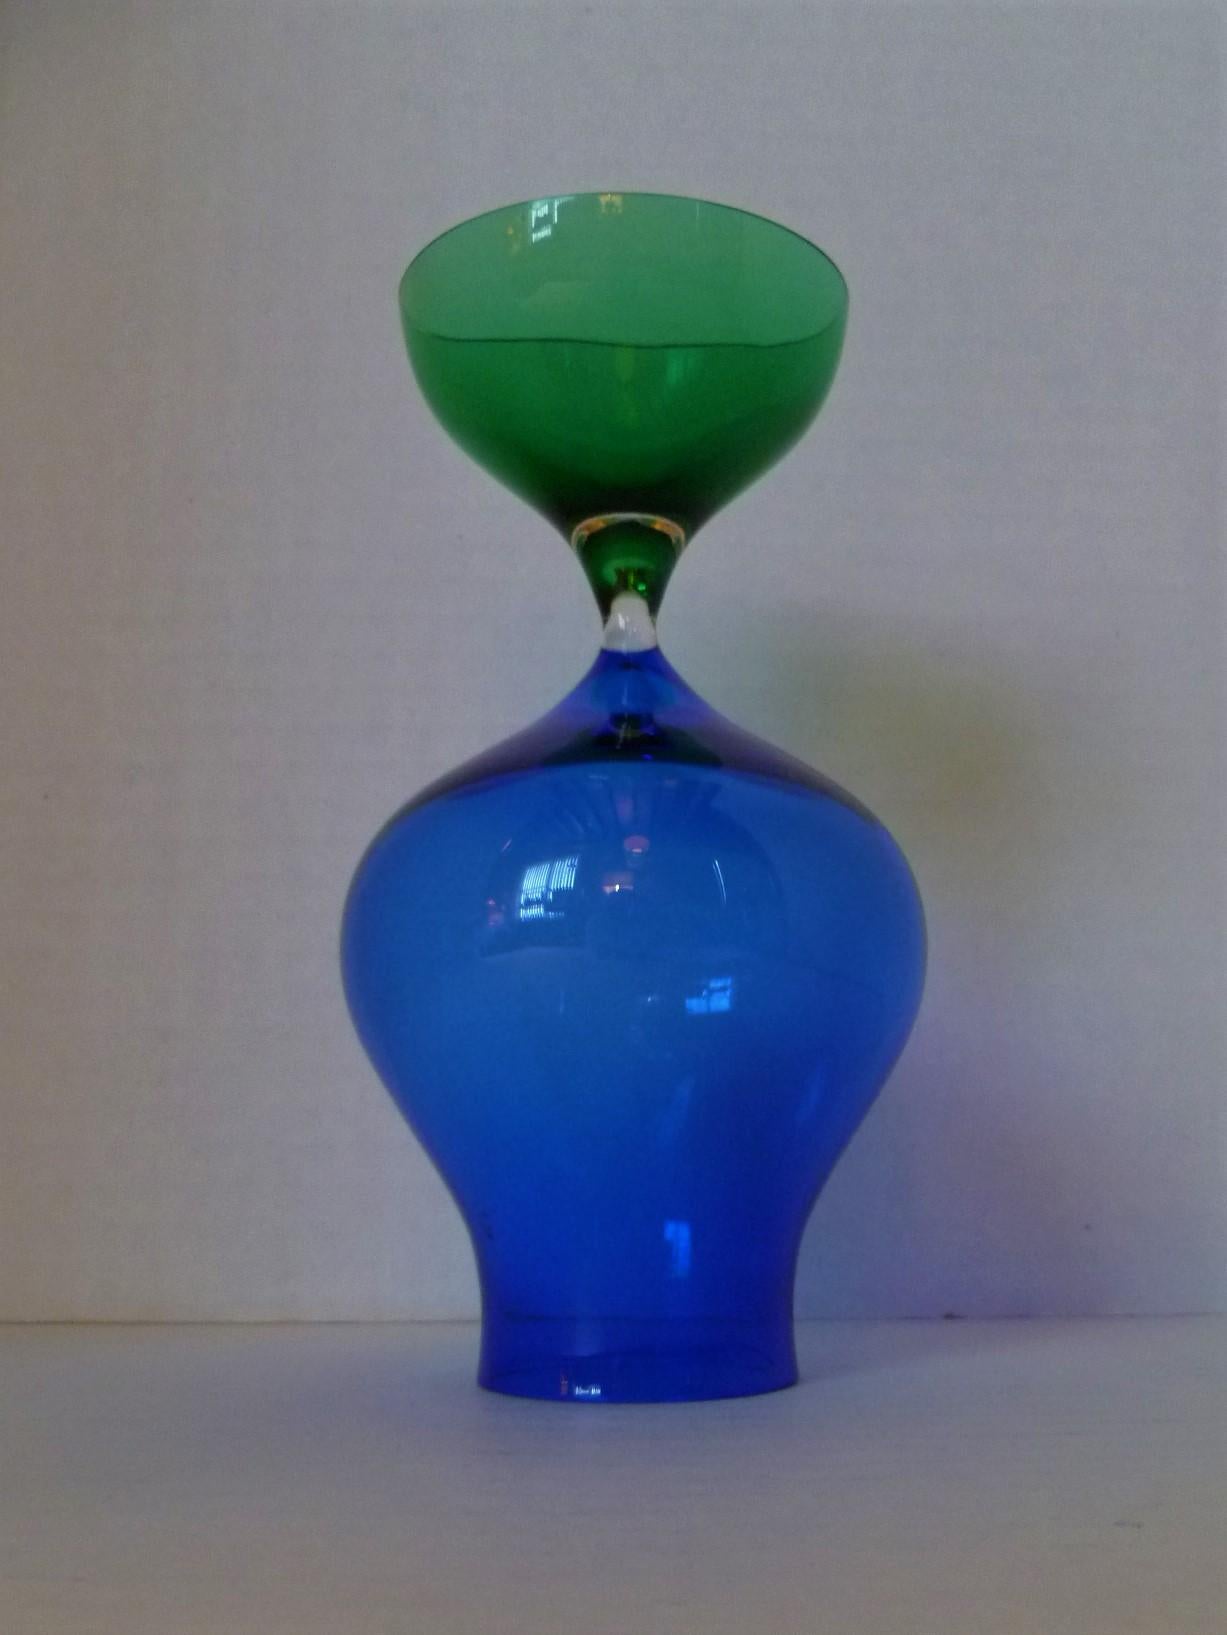 Scandinavian Modern Hourglass shaped vessel by Vicke Lindstrand for Kosta in 1962, its form normally associated with Murano glassblowers. With a blue and green color combination, its thin blown glass body makes it very elegant. Able to be used with